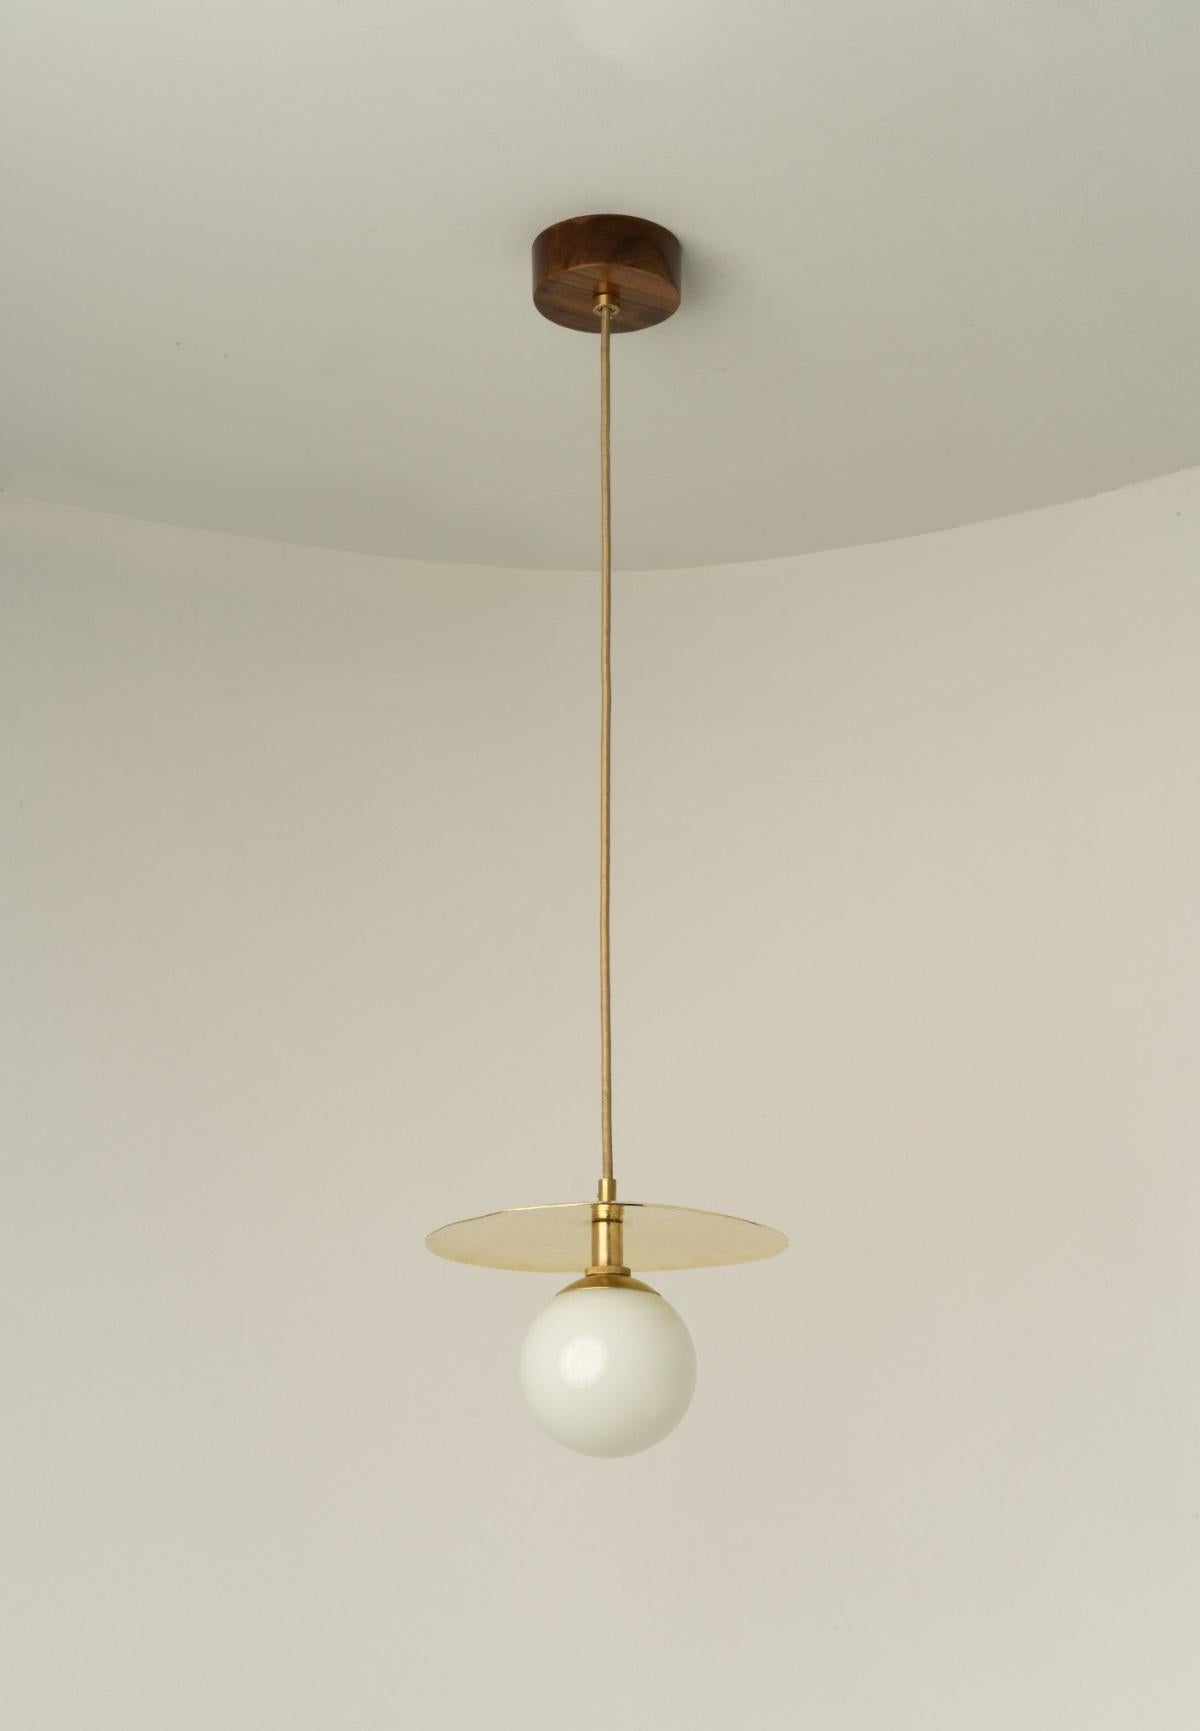 Vitra Pendant Lamp by Isabel Moncada
Dimensions: D 30 x H 100 cm.
Materials: Brass, Glass.

Available in different colored blown glass globes. All our lamps can be wired according to each country. If sold to the USA it will be wired for the USA for